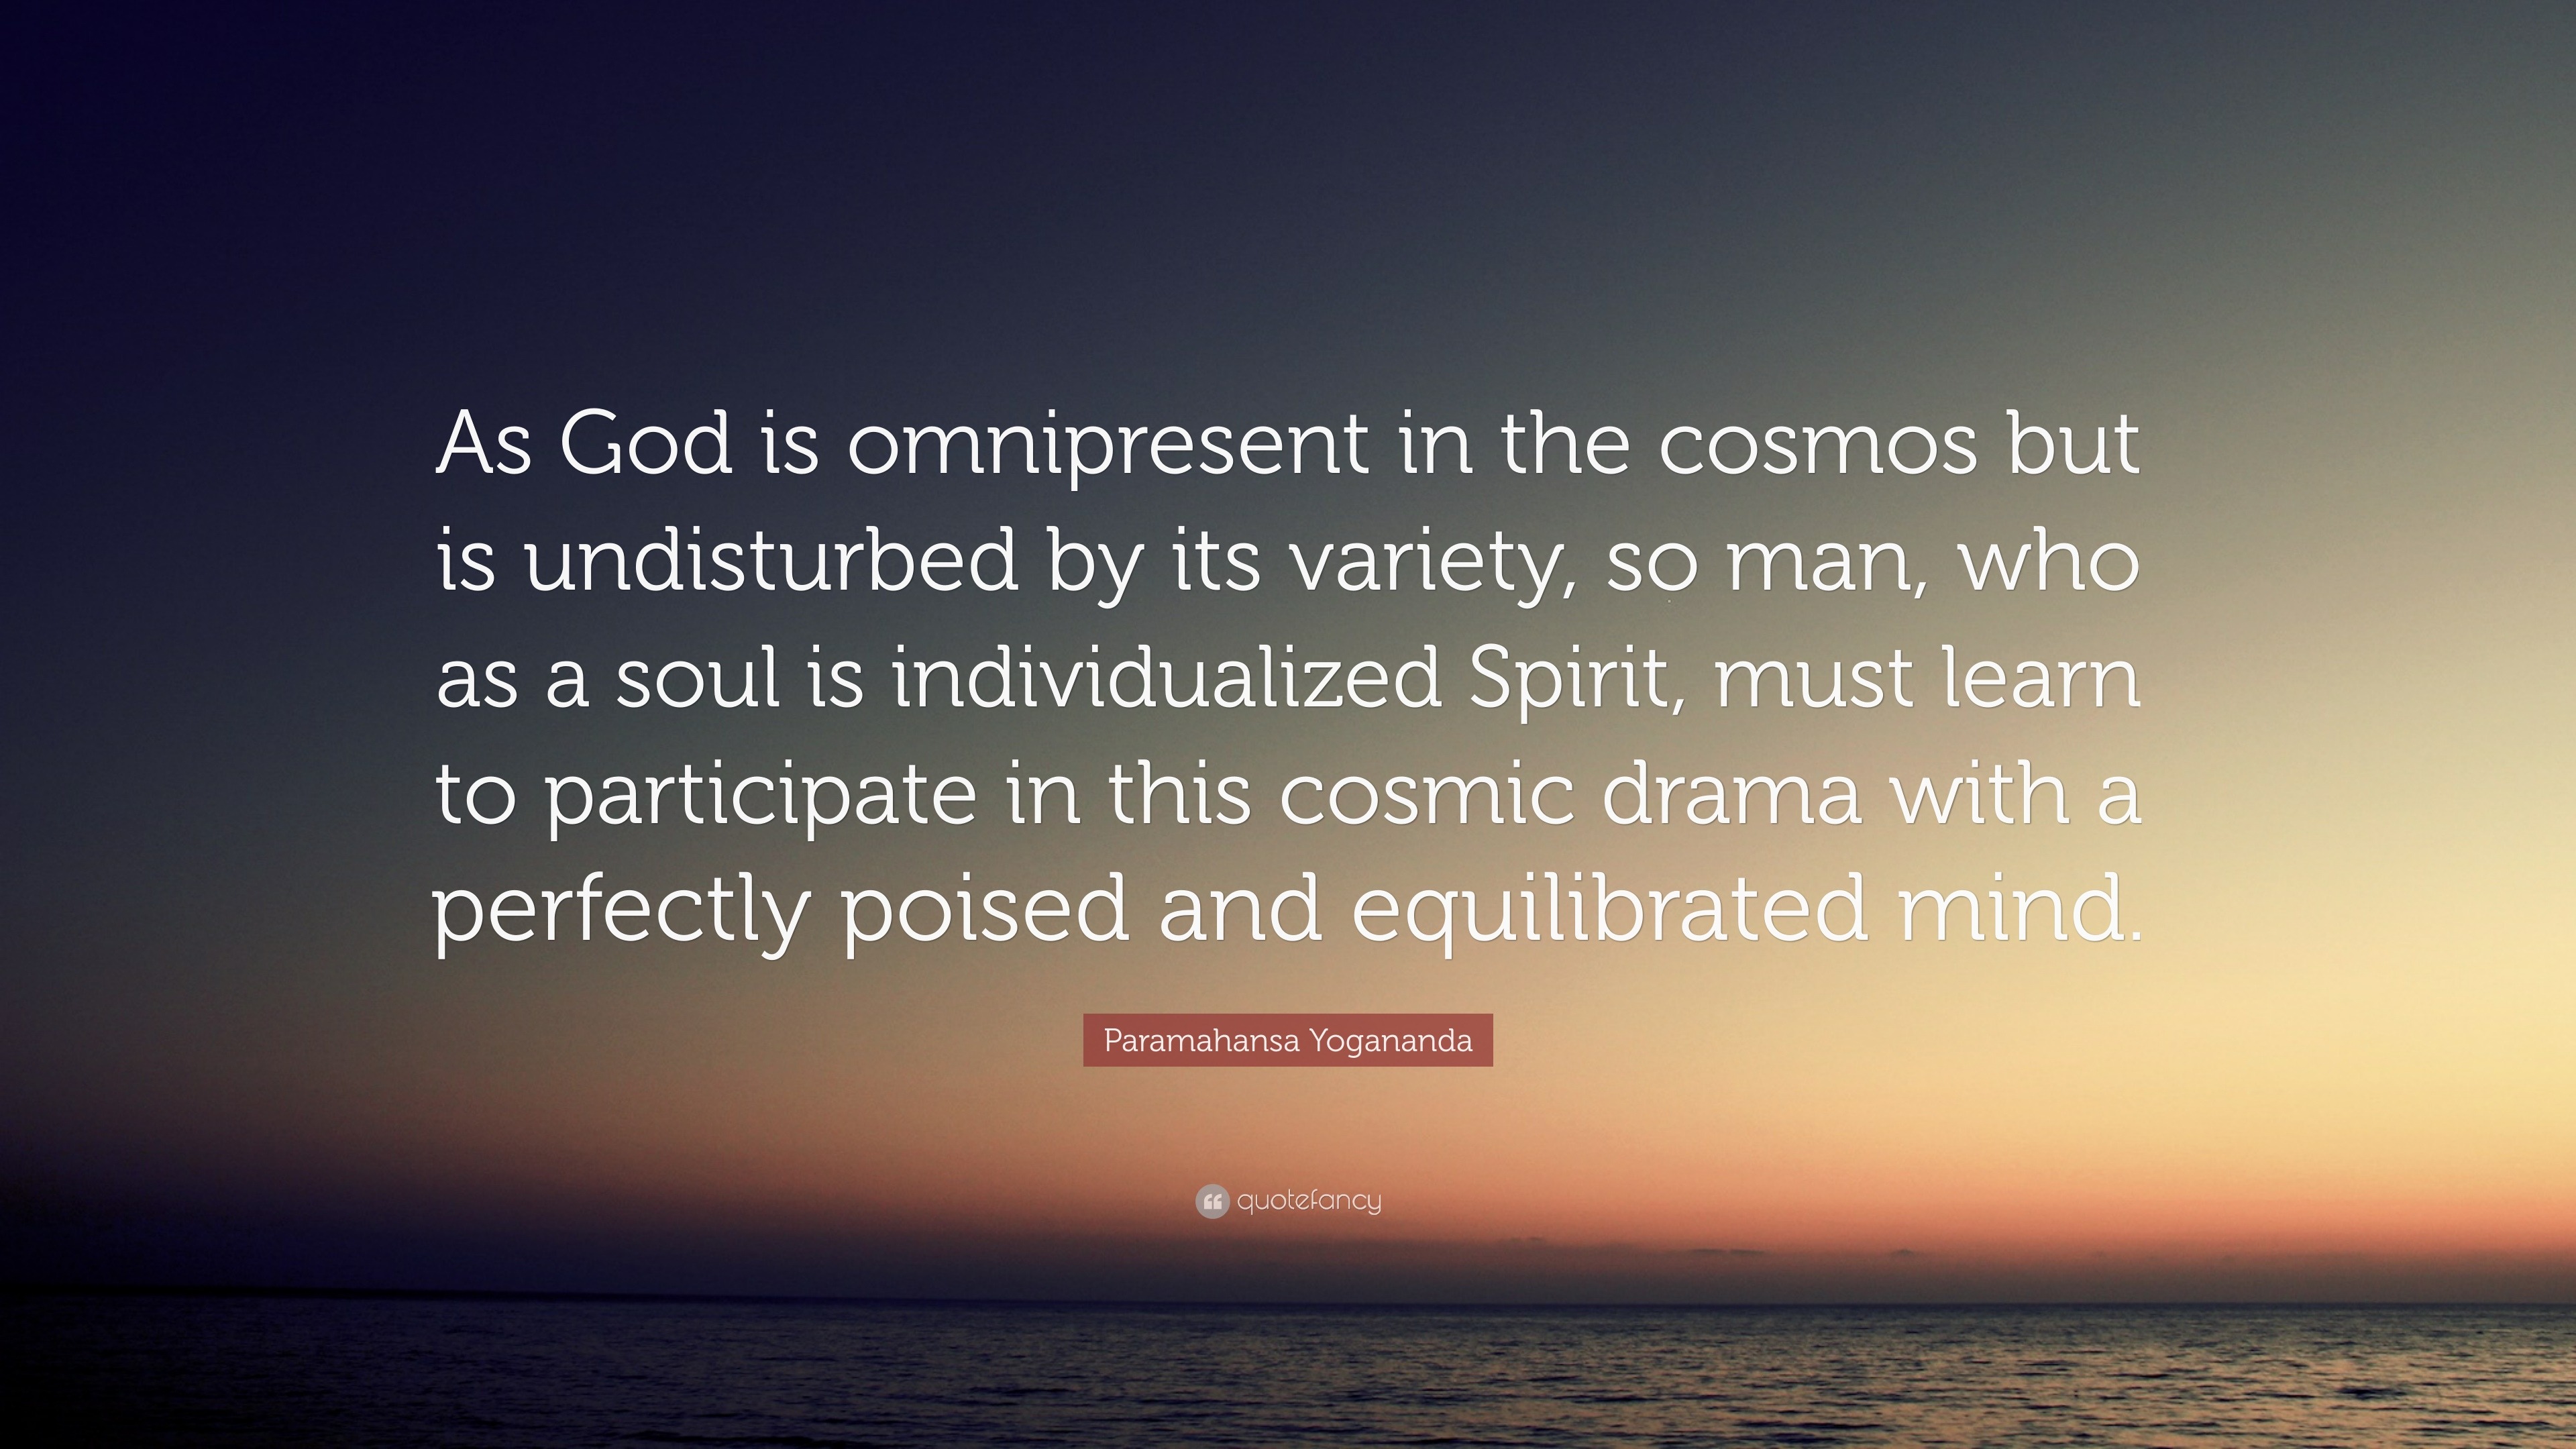 Paramahansa Yogananda Quote: “As God is omnipresent in the cosmos but ...